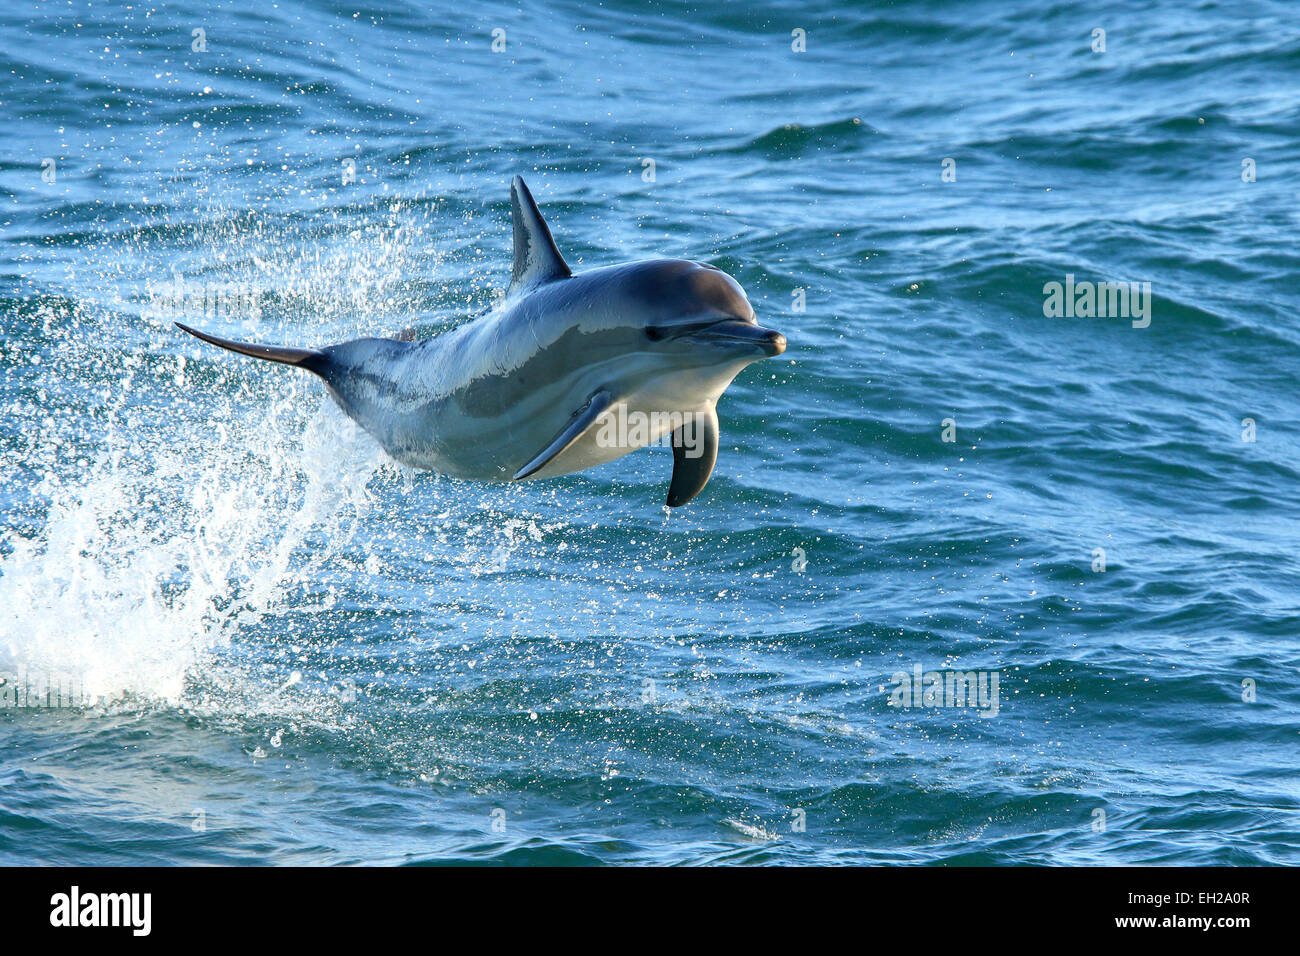 Dolphin Long beaked long-beaked, common dolphin (Delphinus capensis) porpoising and jumping out of the water in the southern Atlantic. Stock Photo